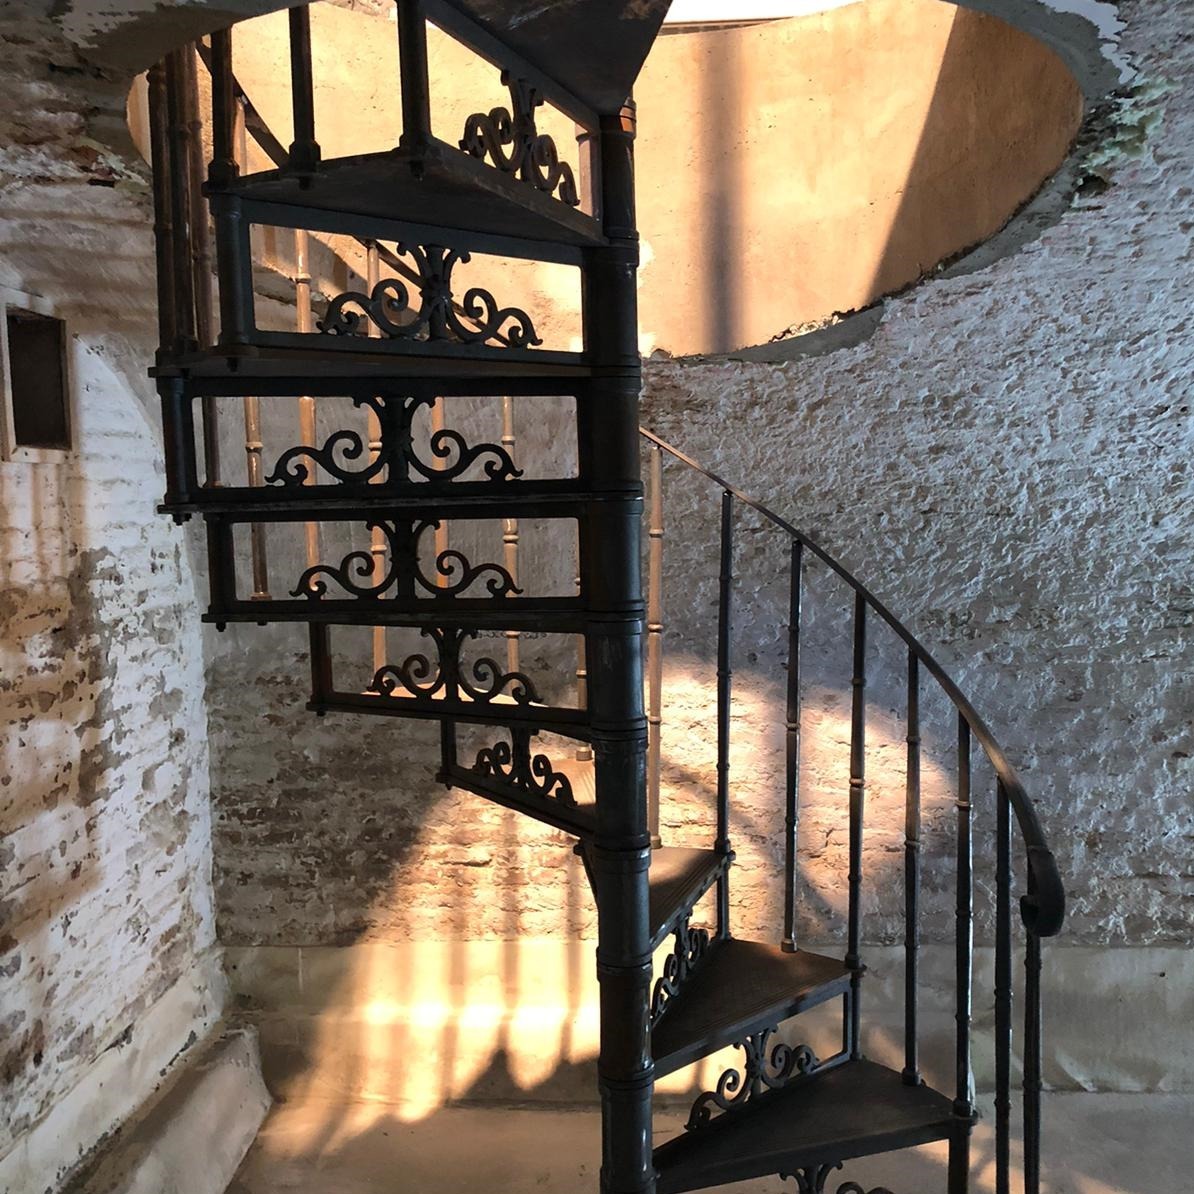 Cast iron spiral staircase model Saint-Tropez de Luxe at the Restaurant Marcus Coffee, Tea Blends & Lifestyle in Vlissingen (the Netherlands)